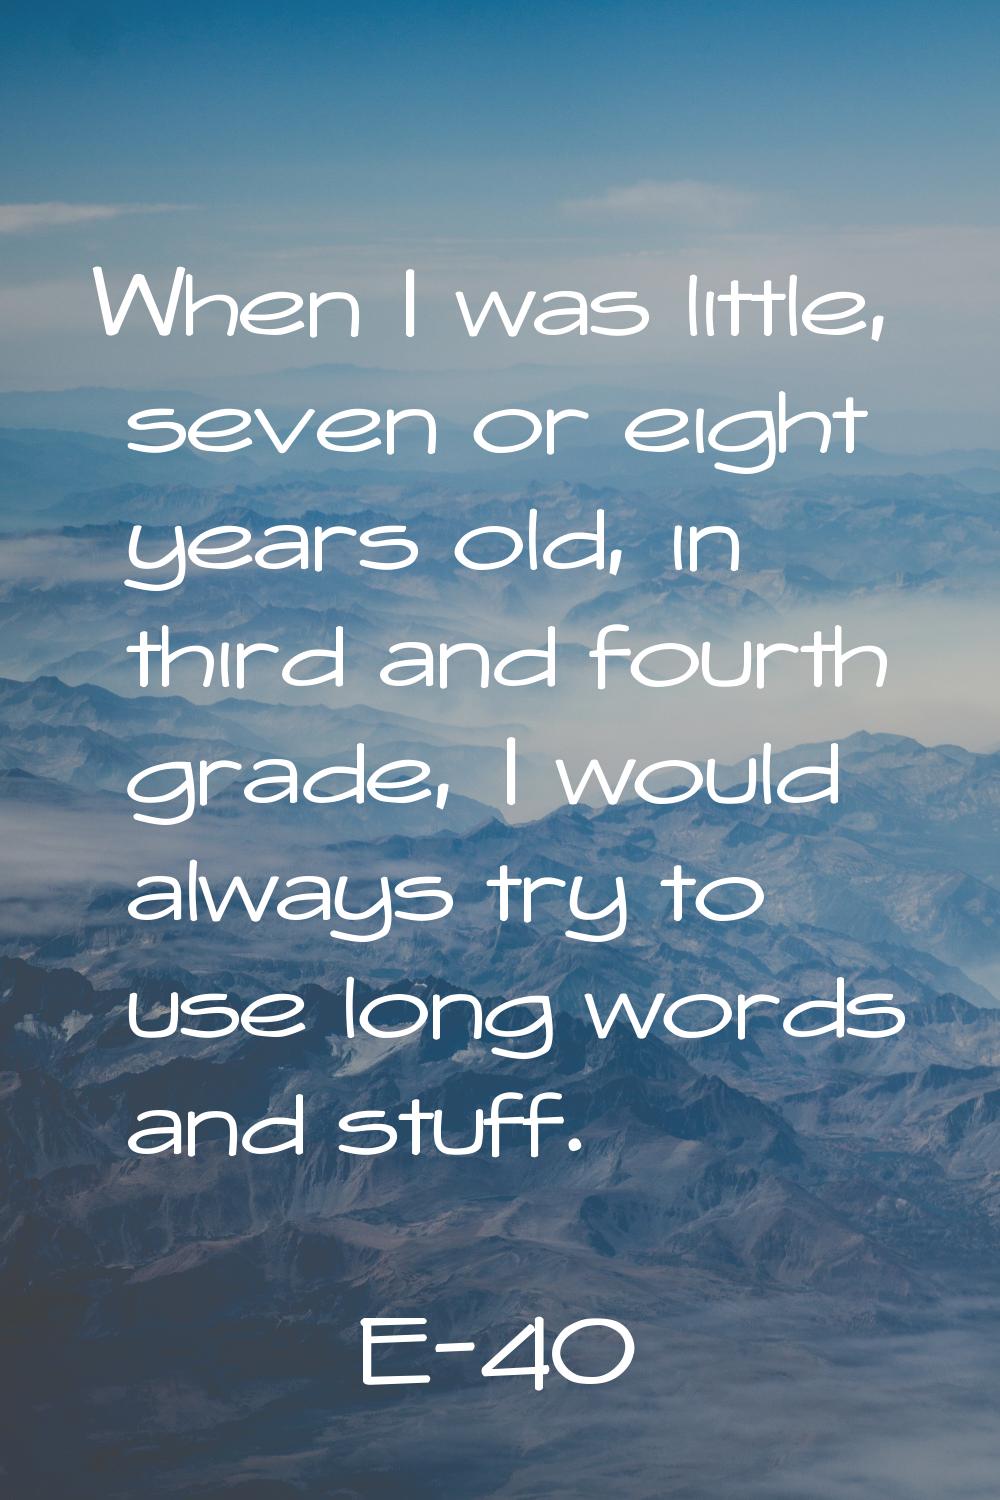 When I was little, seven or eight years old, in third and fourth grade, I would always try to use l